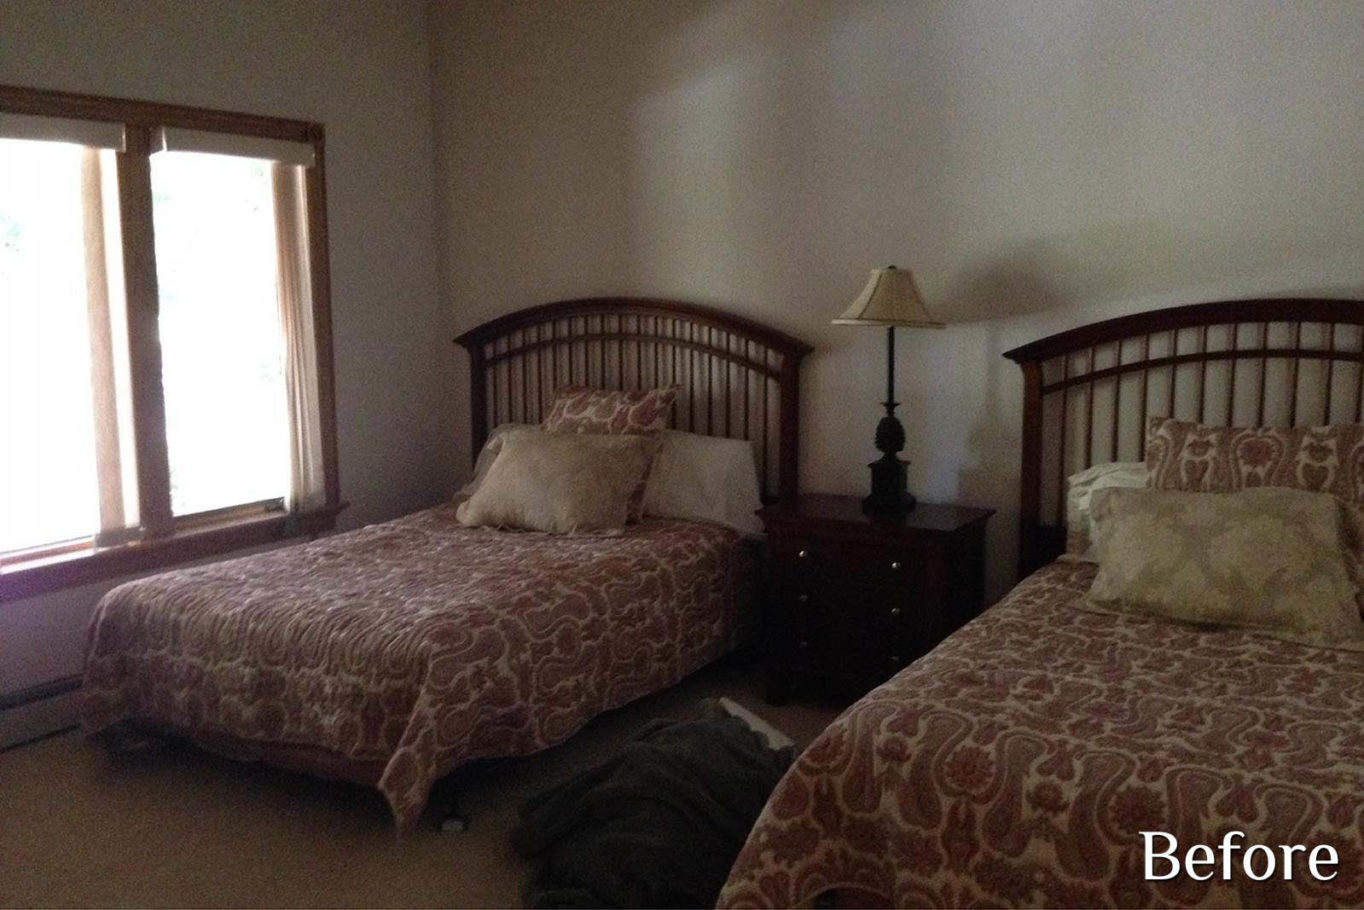 A guest bedroom, two vintage wooden beds, and carpet flooring